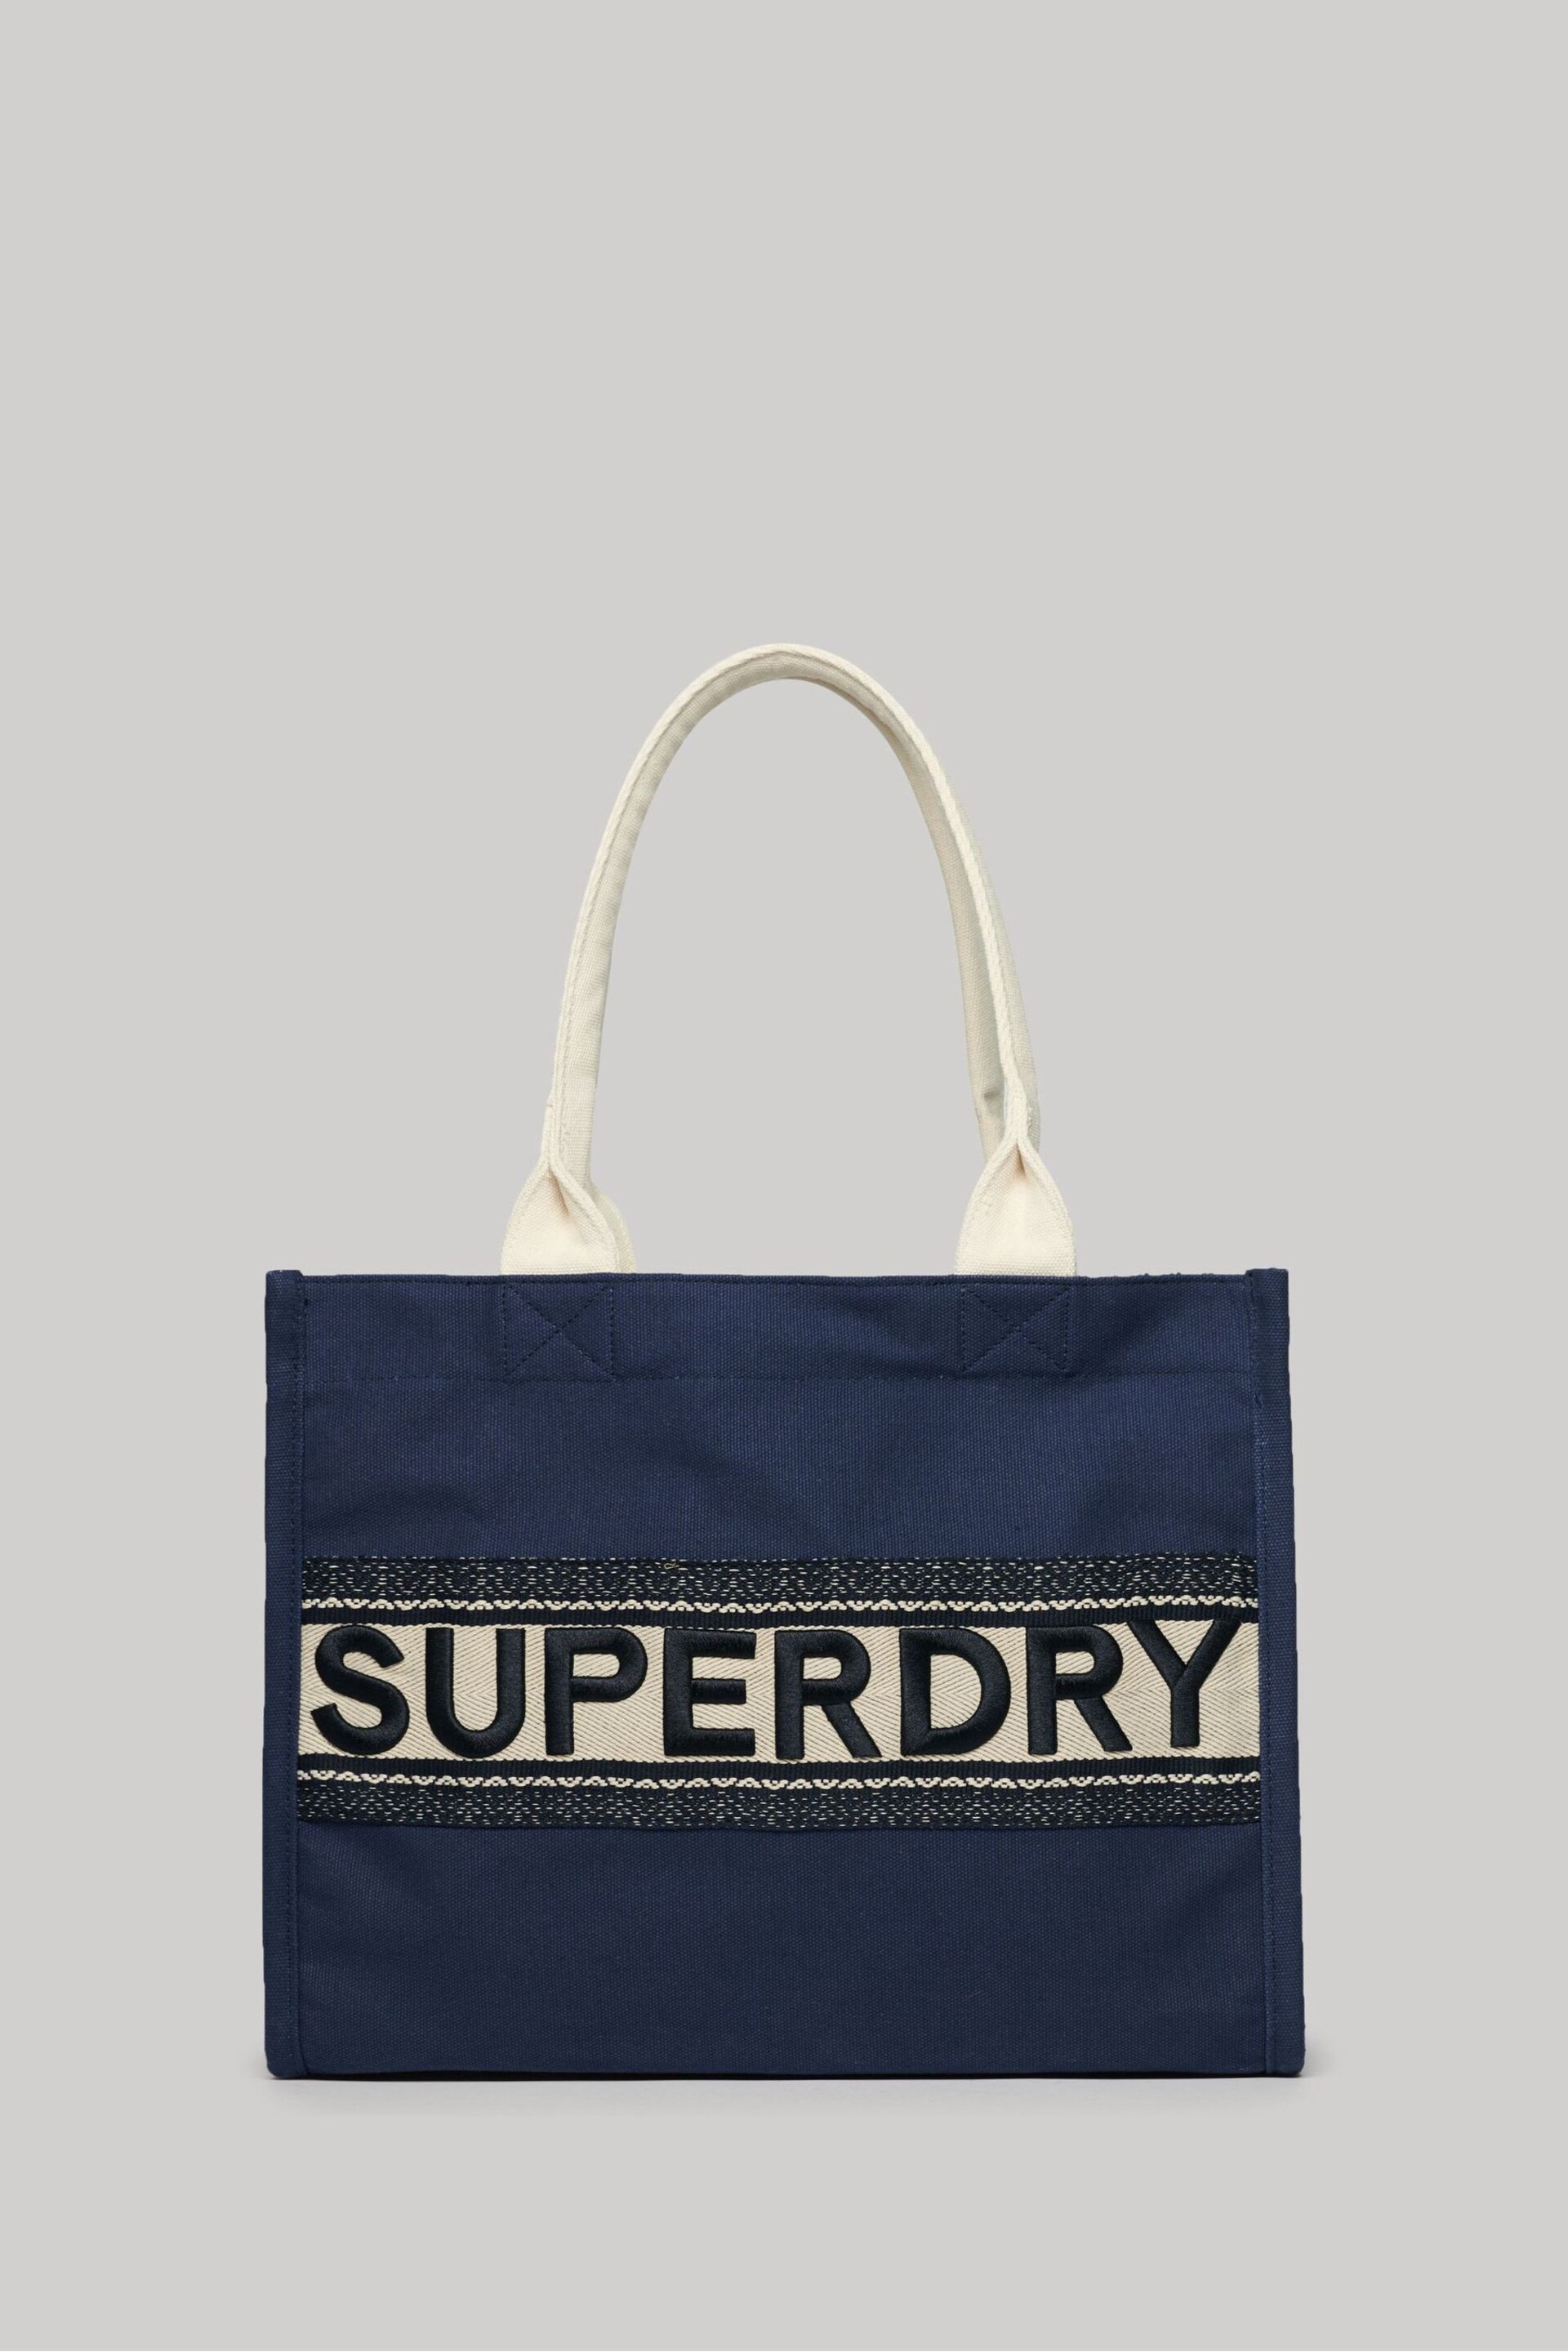 Superdry Blue Luxi Tote Bag - Image 1 of 4